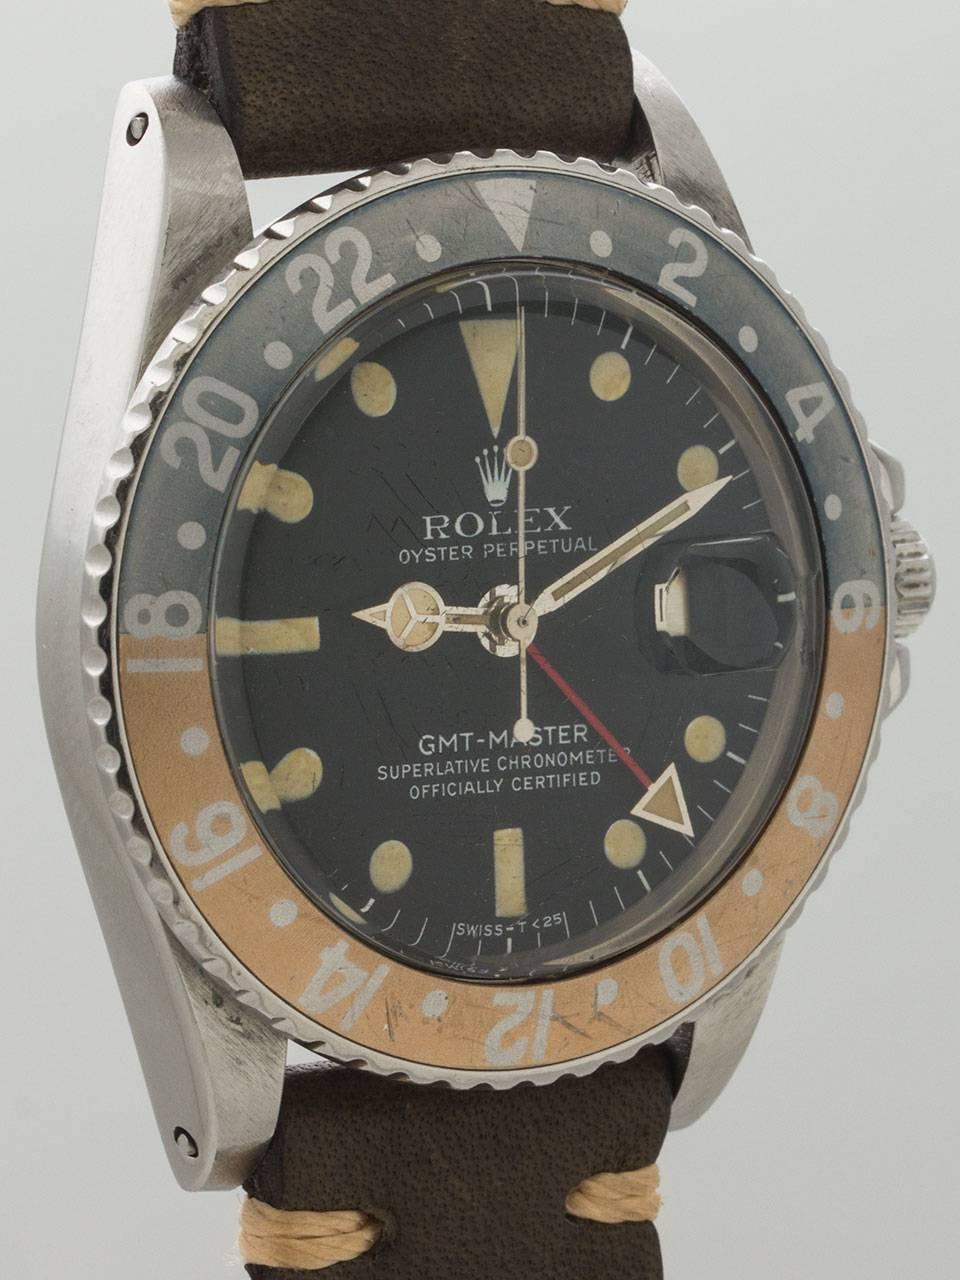 Gorgeous Rolex GMT-Master ref 1675 serial # 1.5 million circa 1969. Original evenly faded red and blue pepsi 24 hour bezel. 40mm diameter case with thick lugs, not overly polished in it’s lifetime. Extremely pleasing original matte black dial with